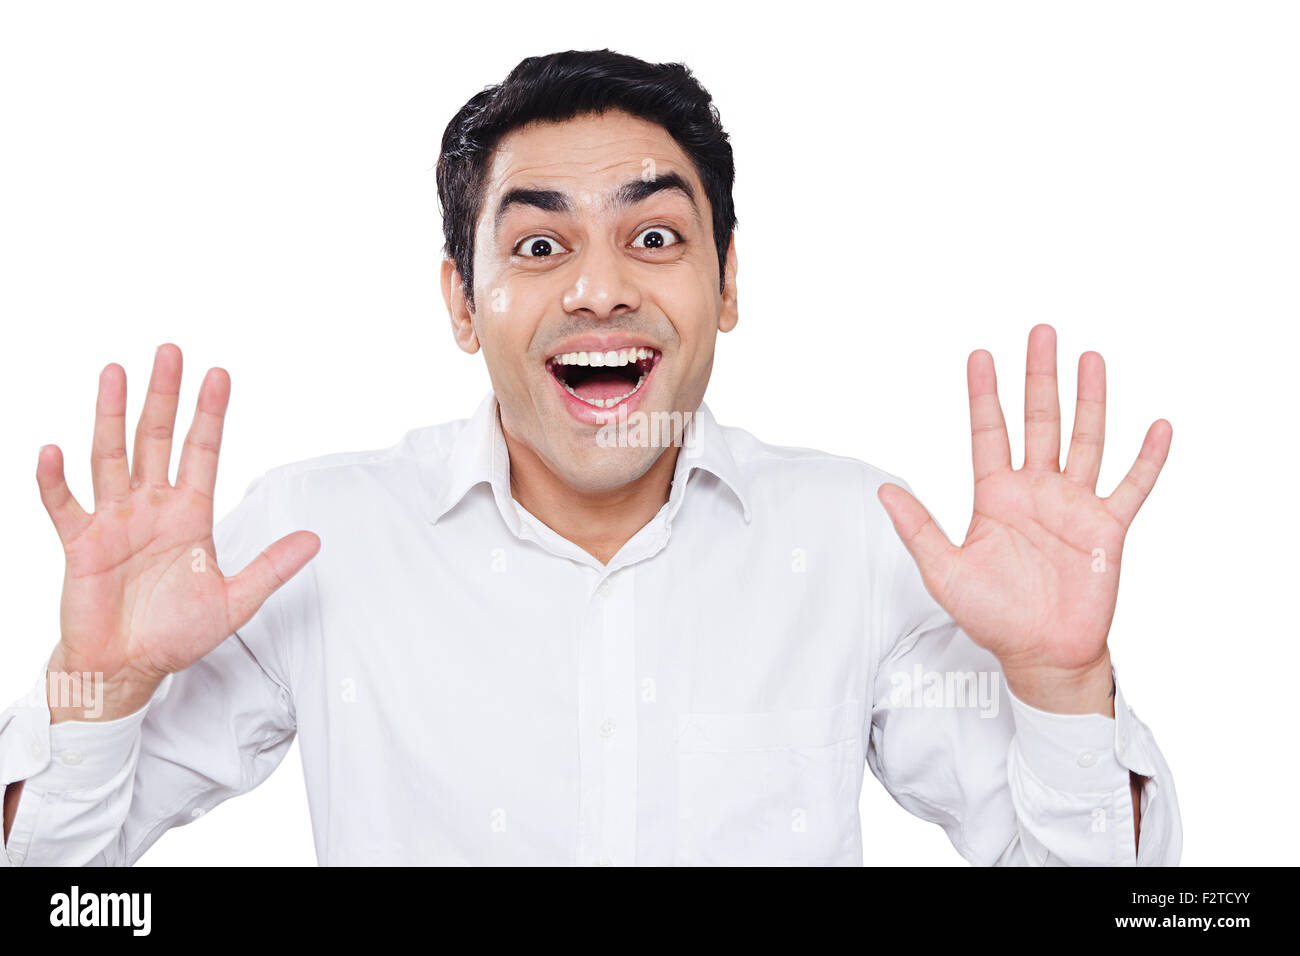 1 indian Adult Man Hand gesturing showing Stock Photo